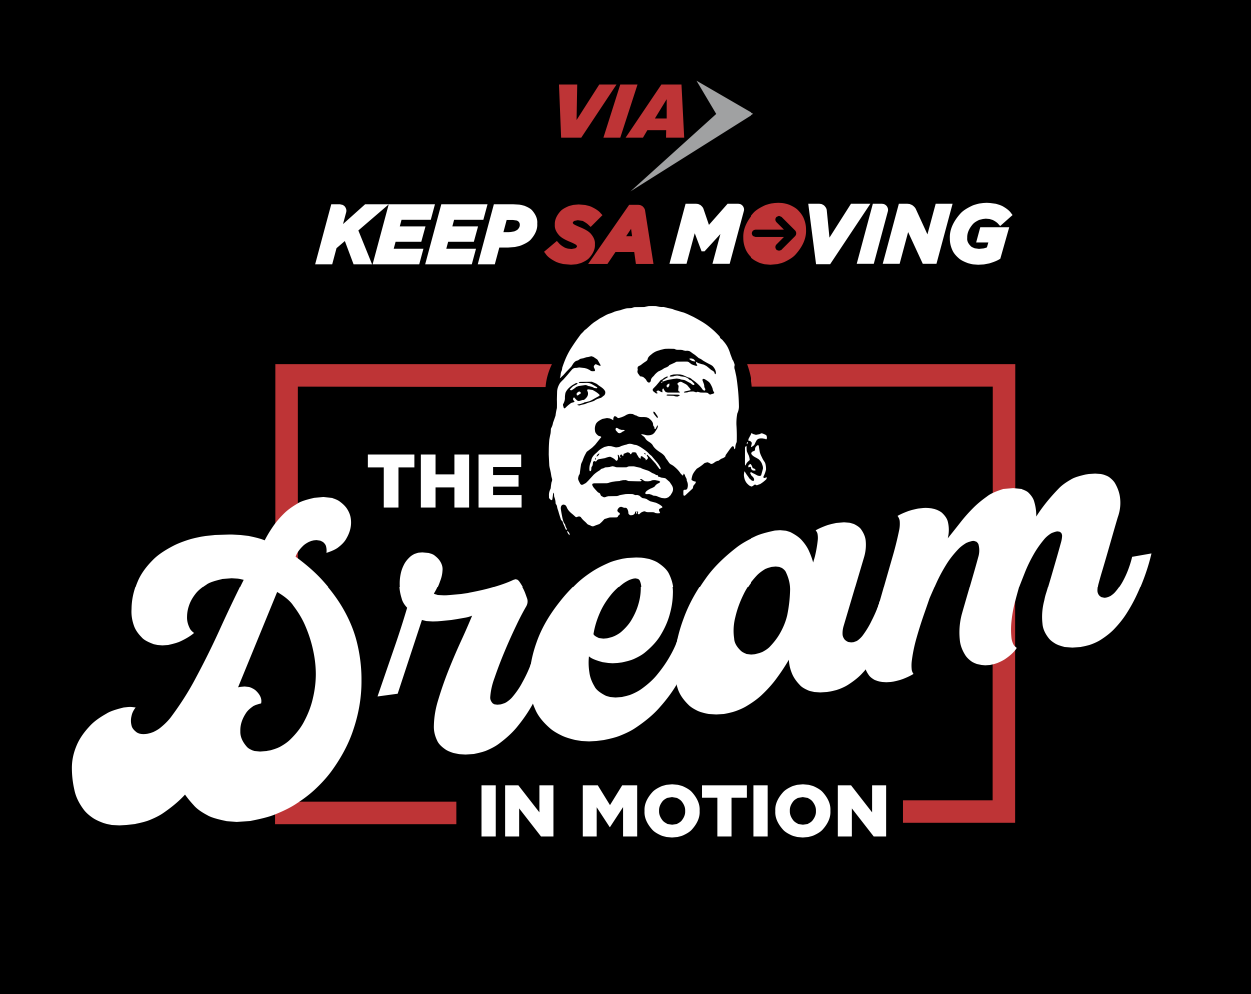 VIA Keep SA Moving the Dream in motion